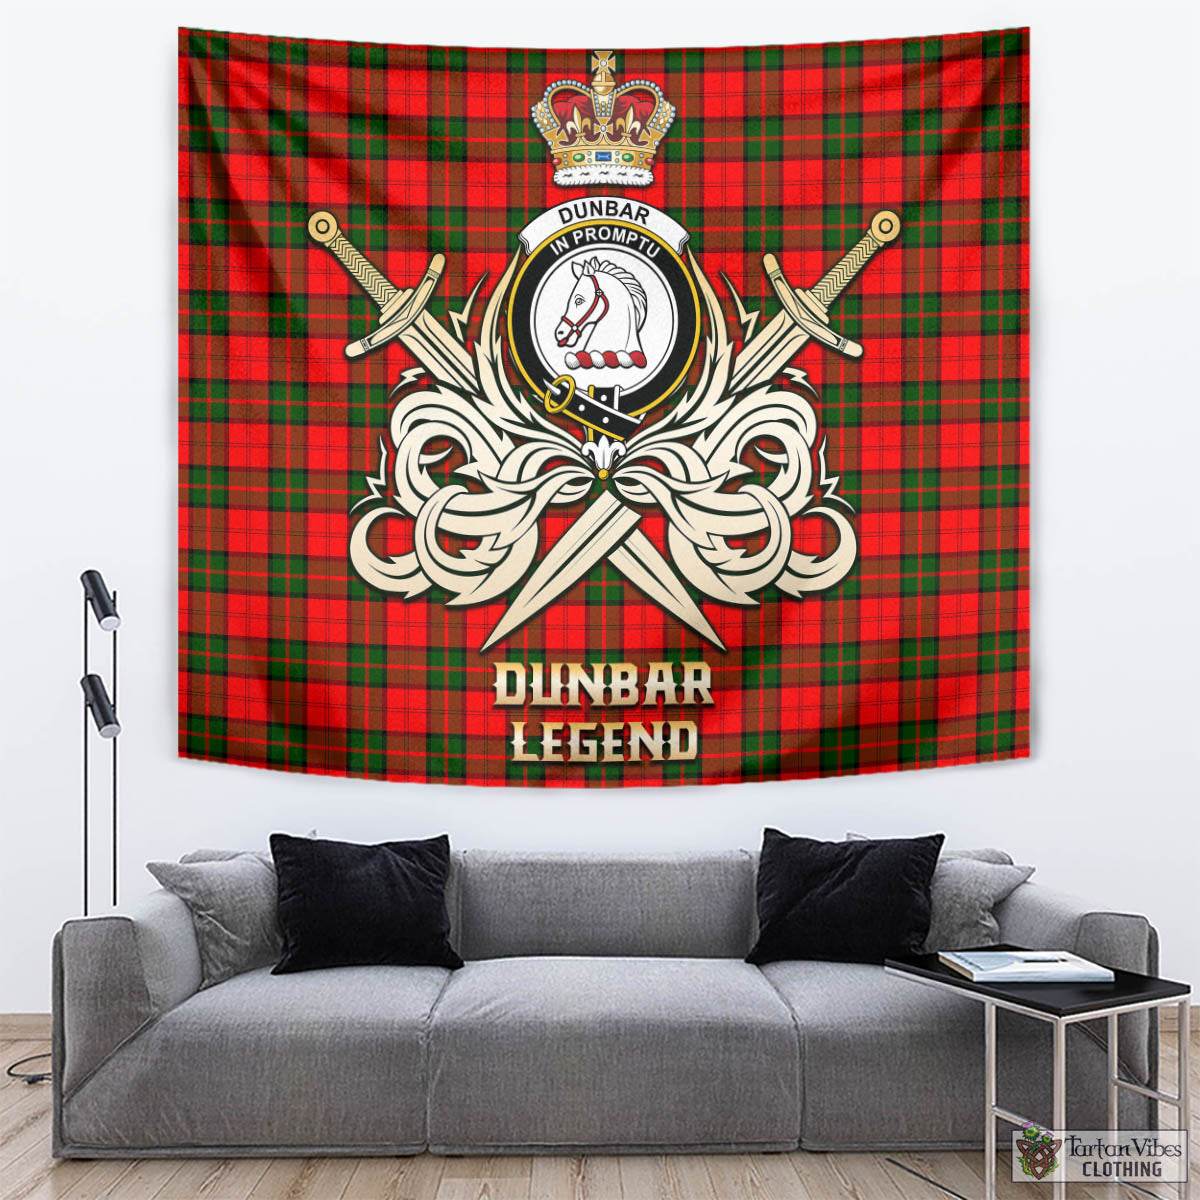 Tartan Vibes Clothing Dunbar Modern Tartan Tapestry with Clan Crest and the Golden Sword of Courageous Legacy